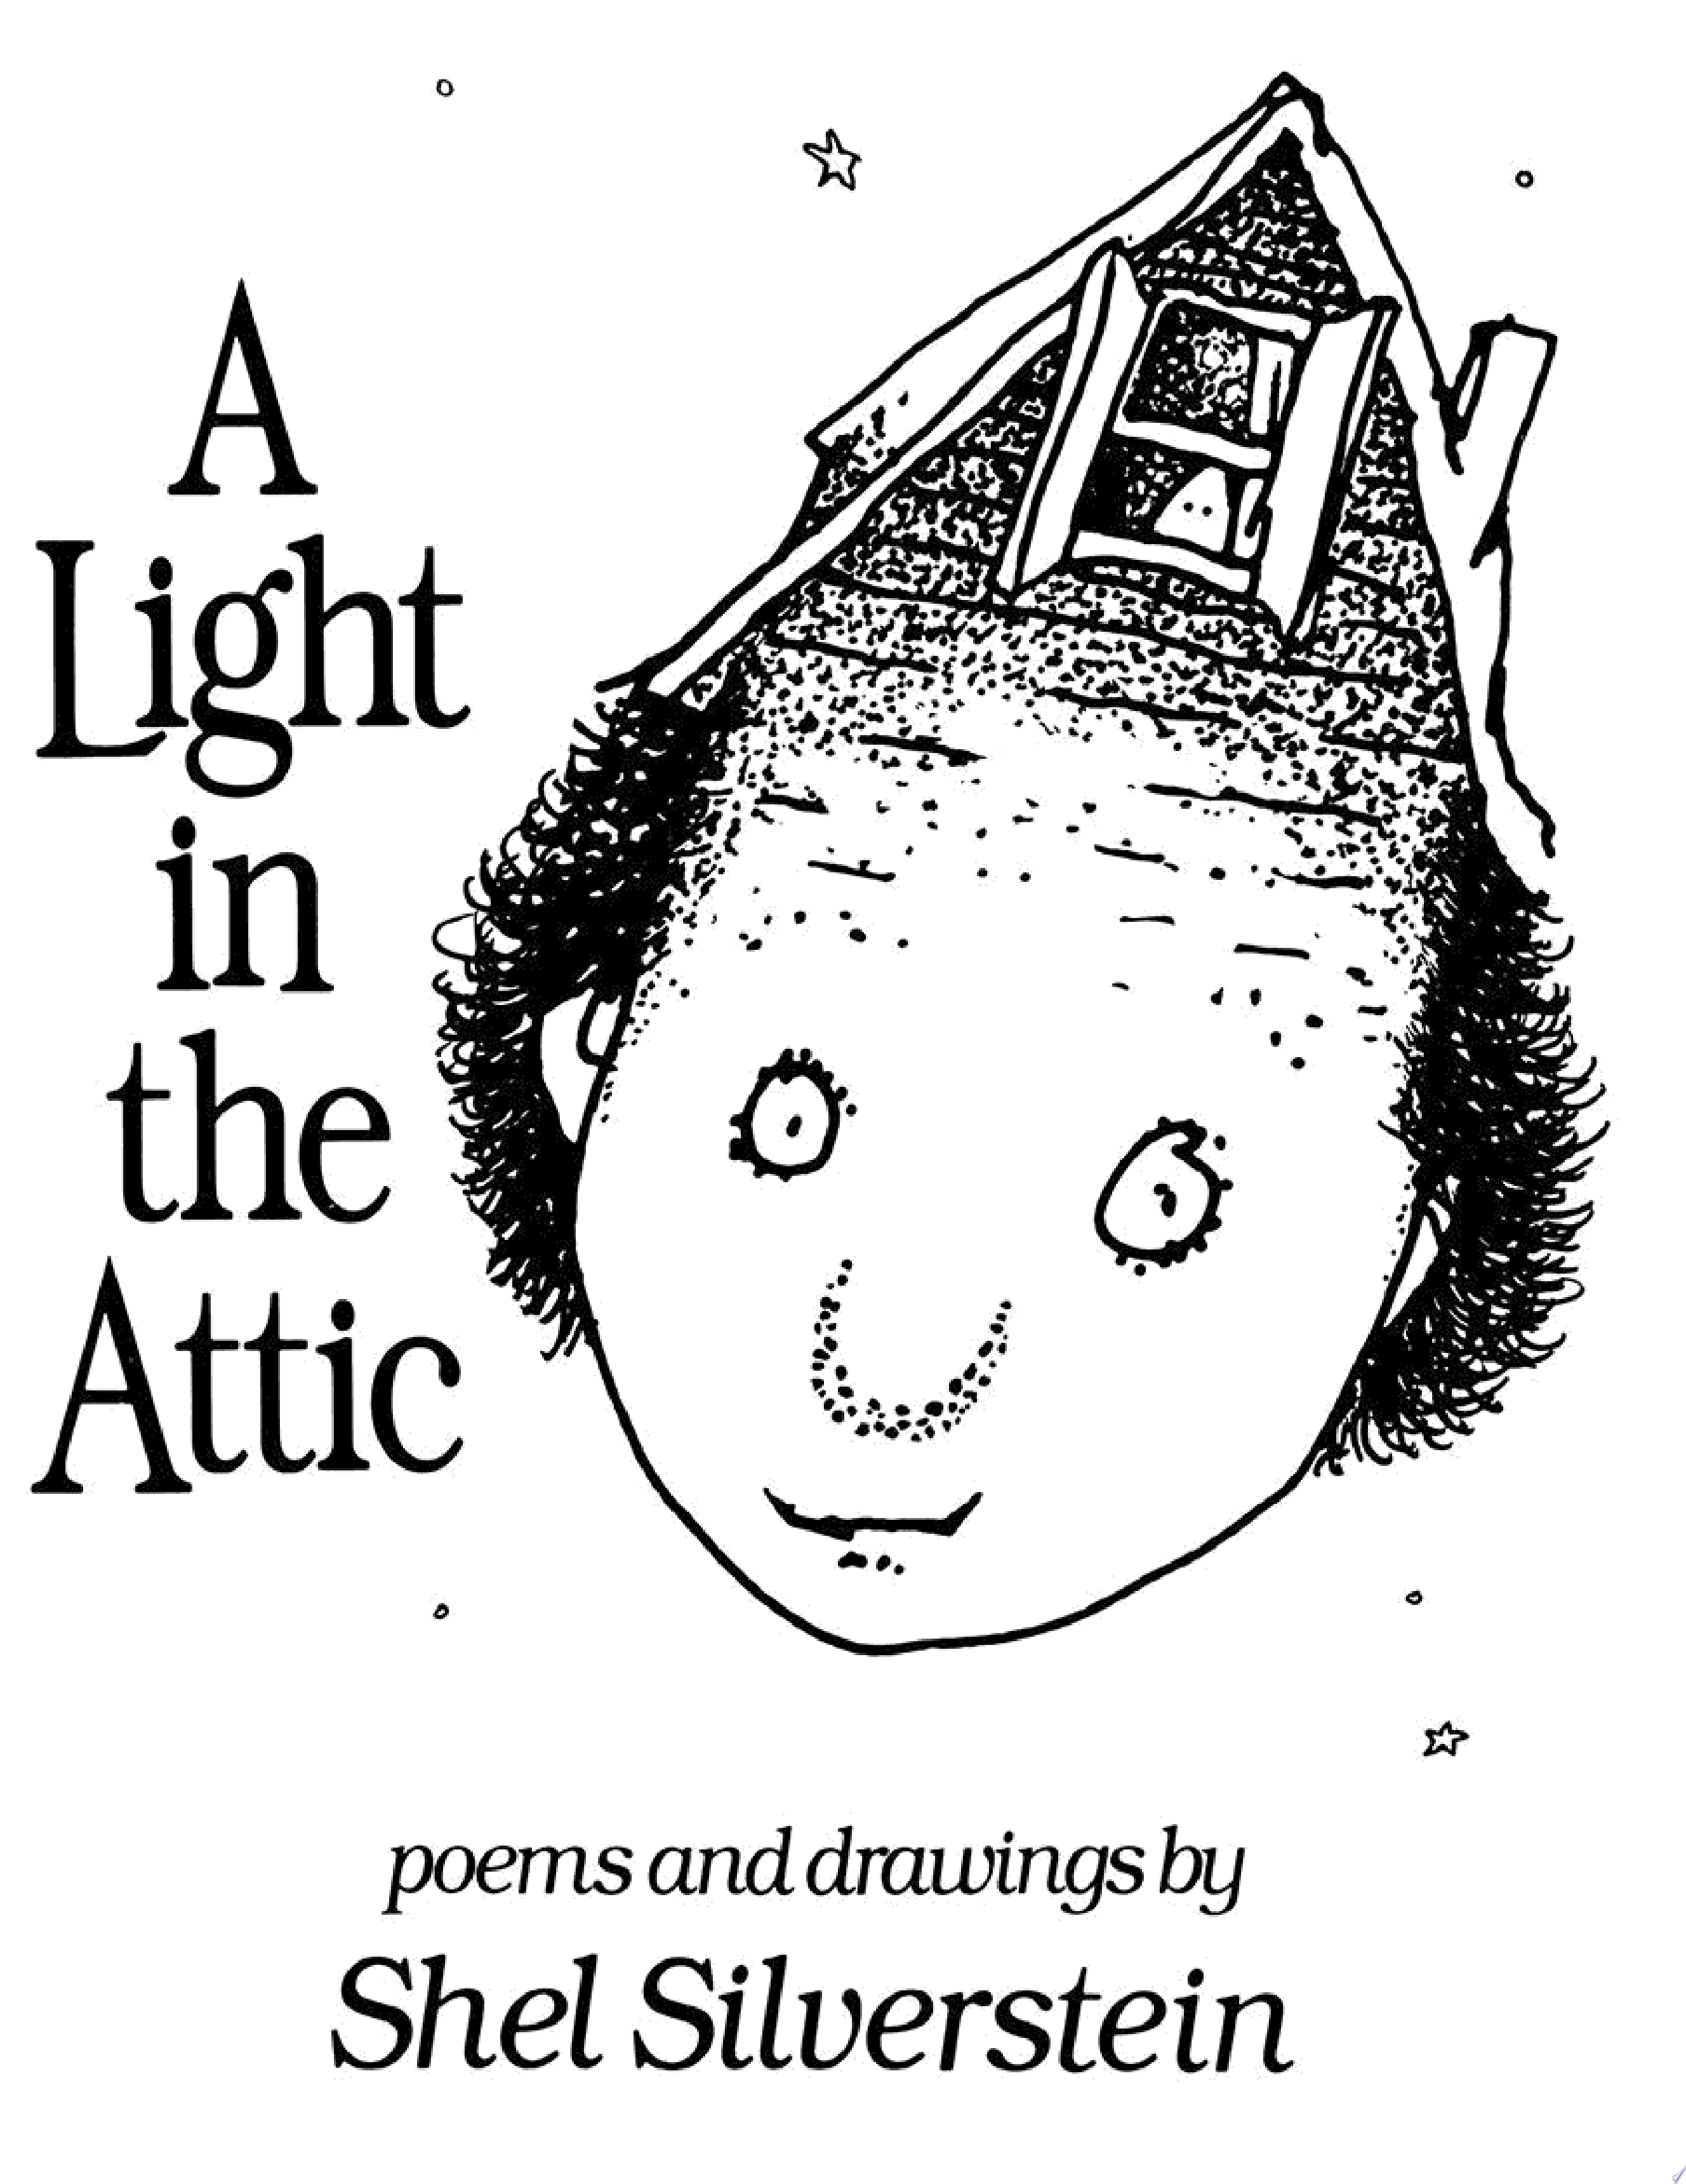 Image for "A Light in the Attic"